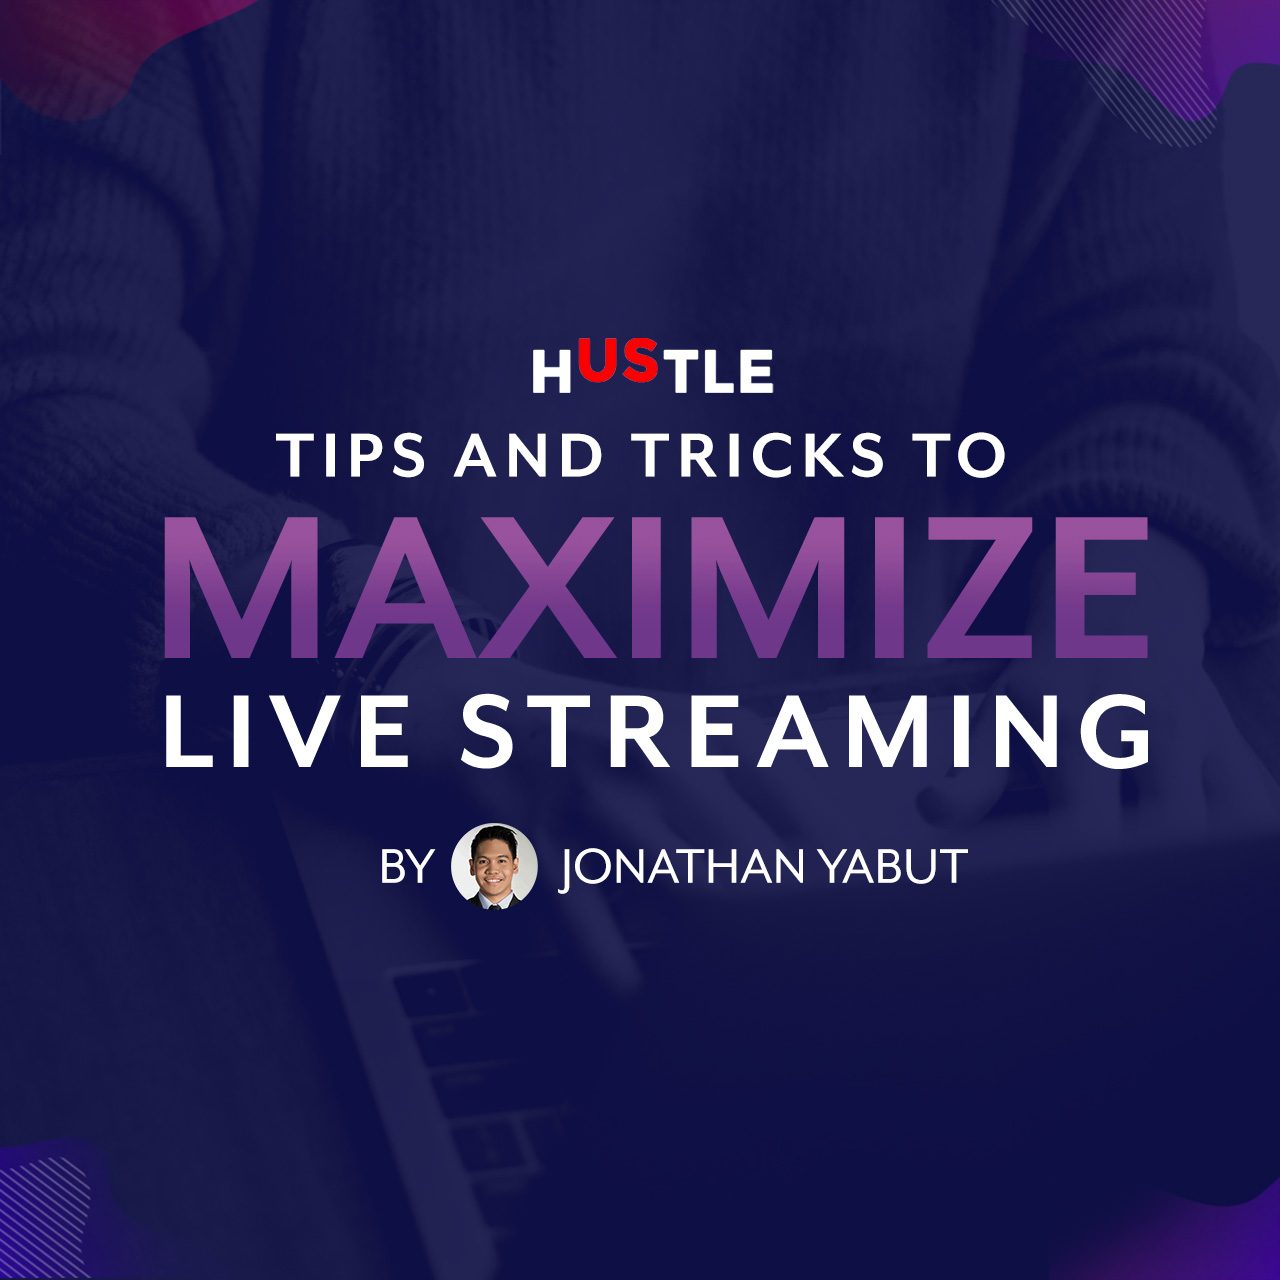 [INFOGRAPHIC] Tips and tricks to live streaming